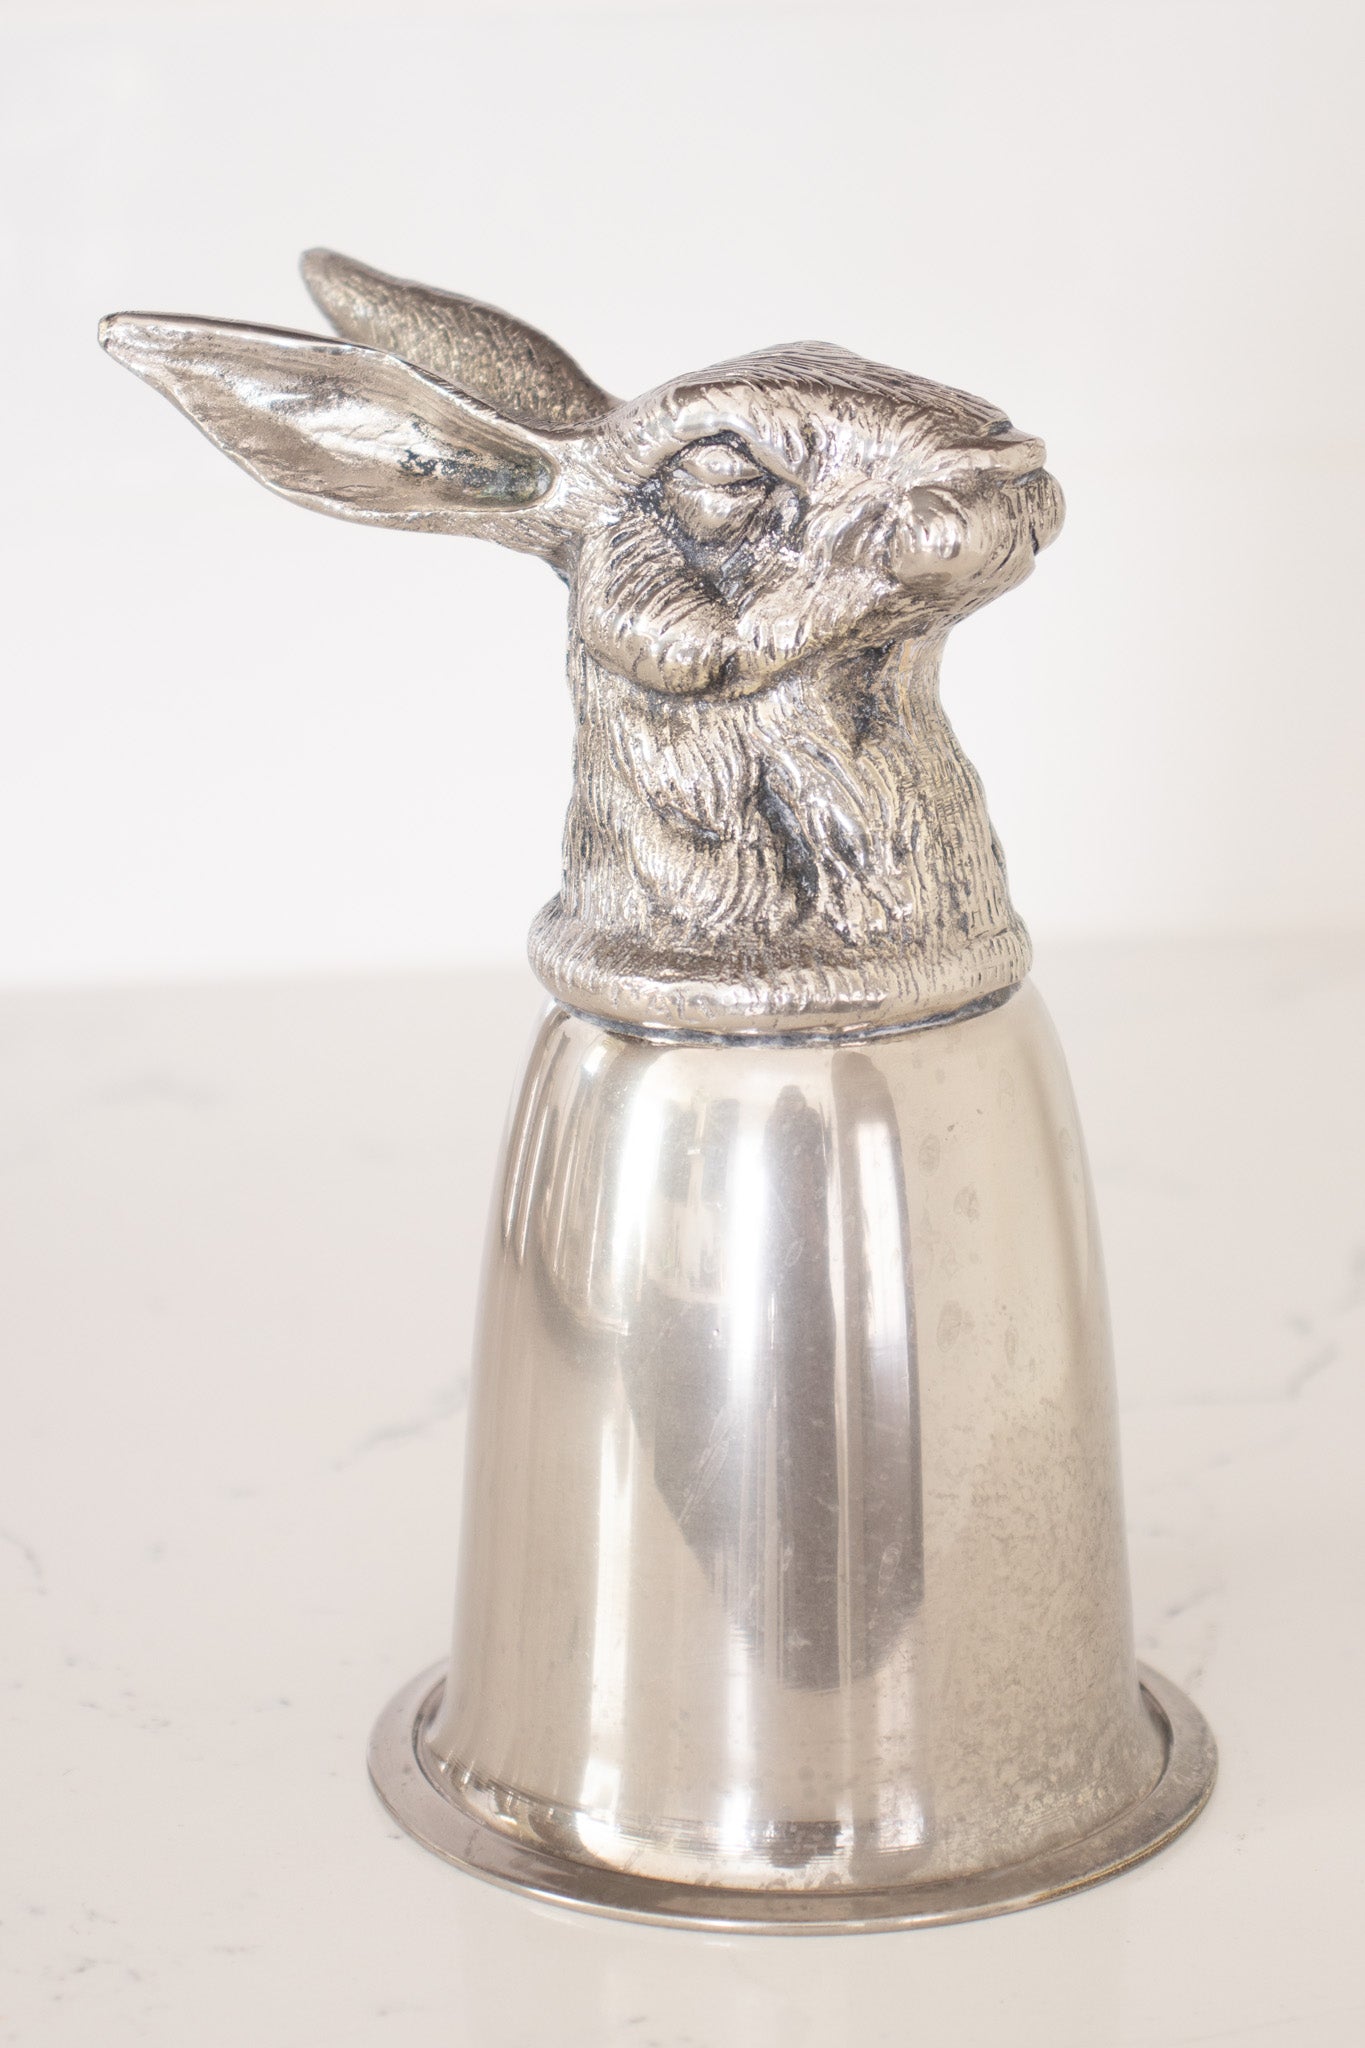 Vintage Gucci 6 Silver Hunting Animal Stirrup Cups & Tray Set rabbit at Recess Home Los Angeles